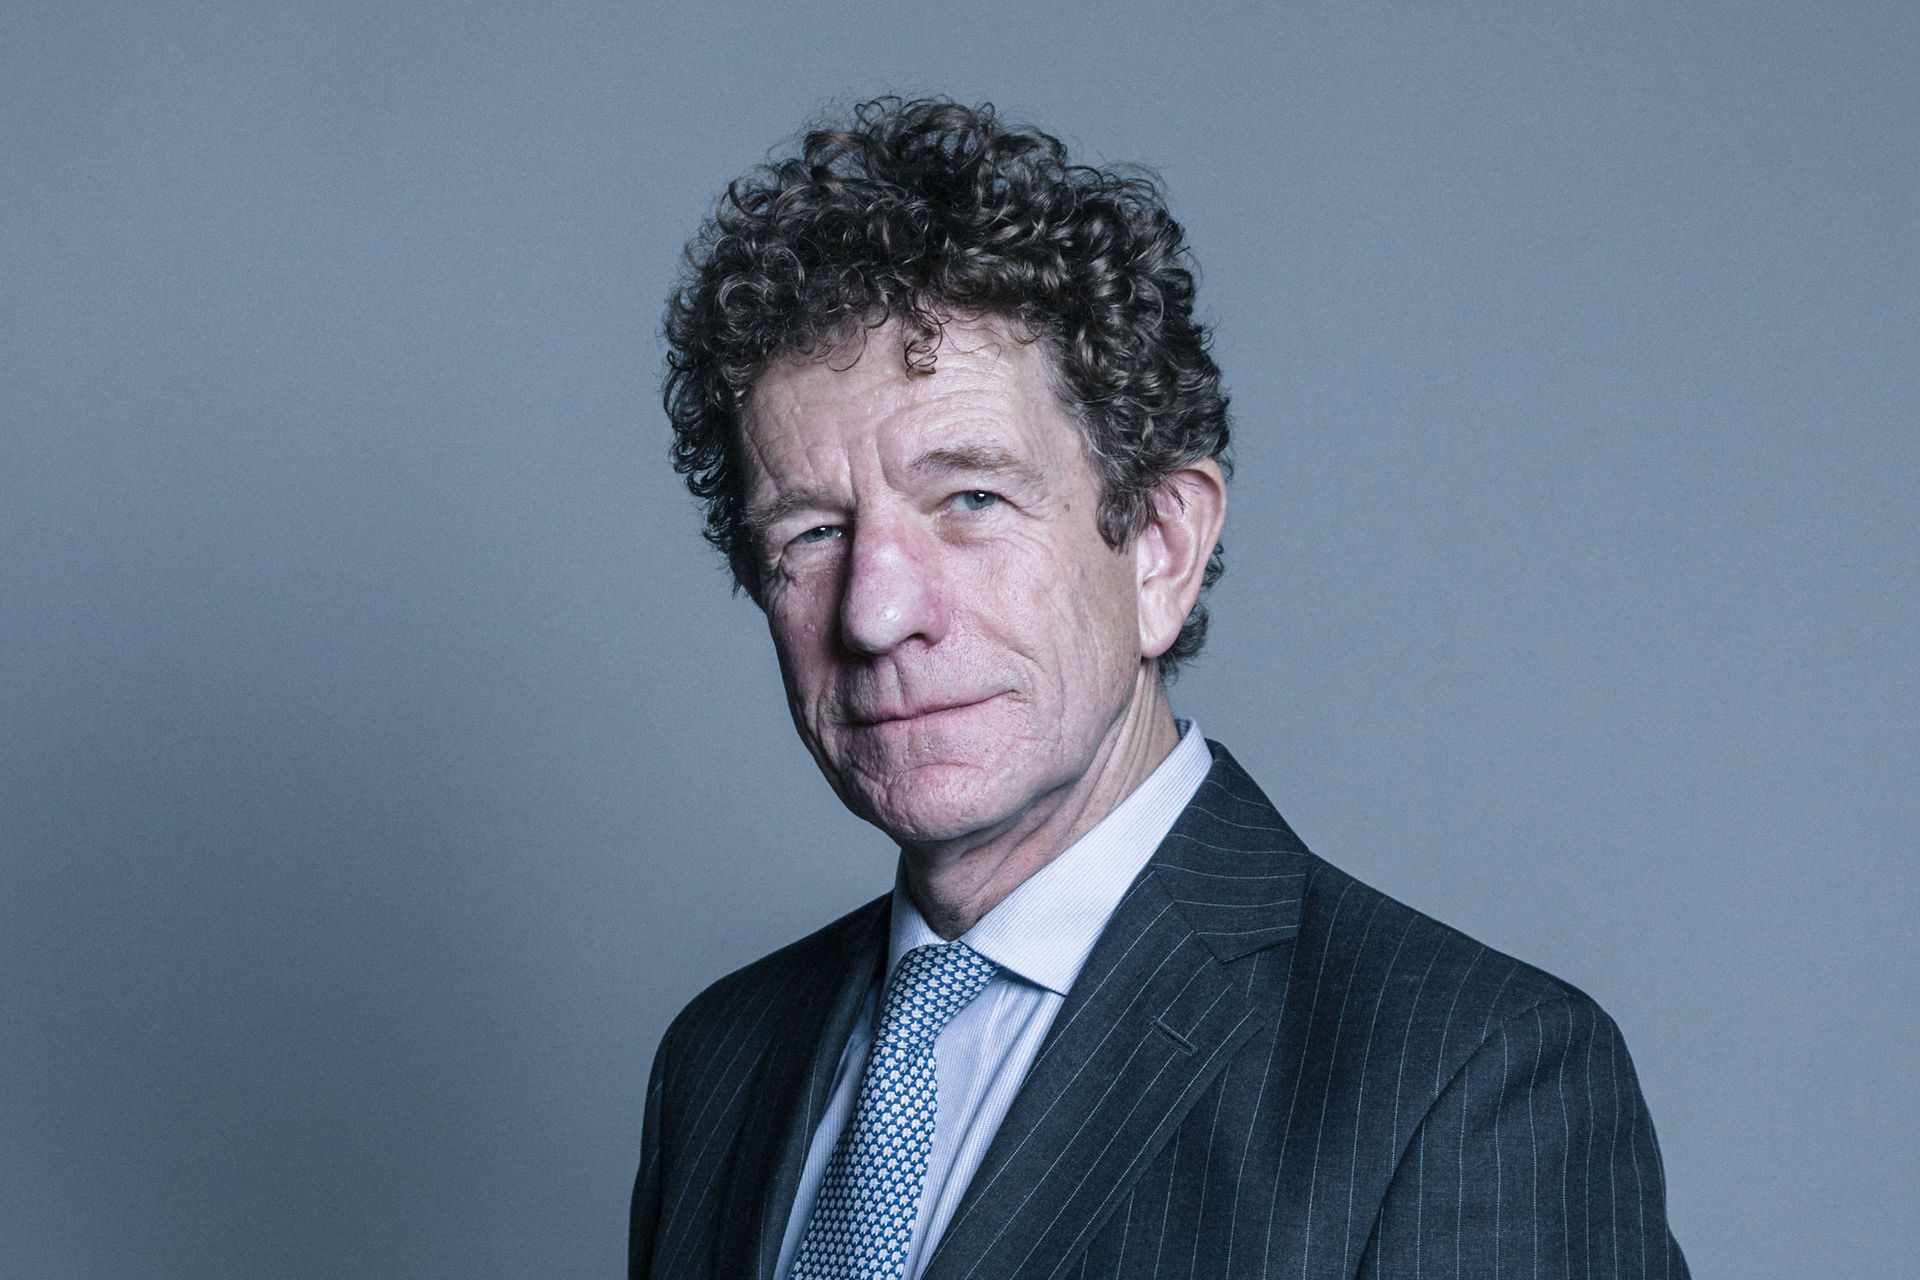 IPSO chairman Lord Faulks said the article amounted to a 'serious breach' of the Editor's Code of Practice.